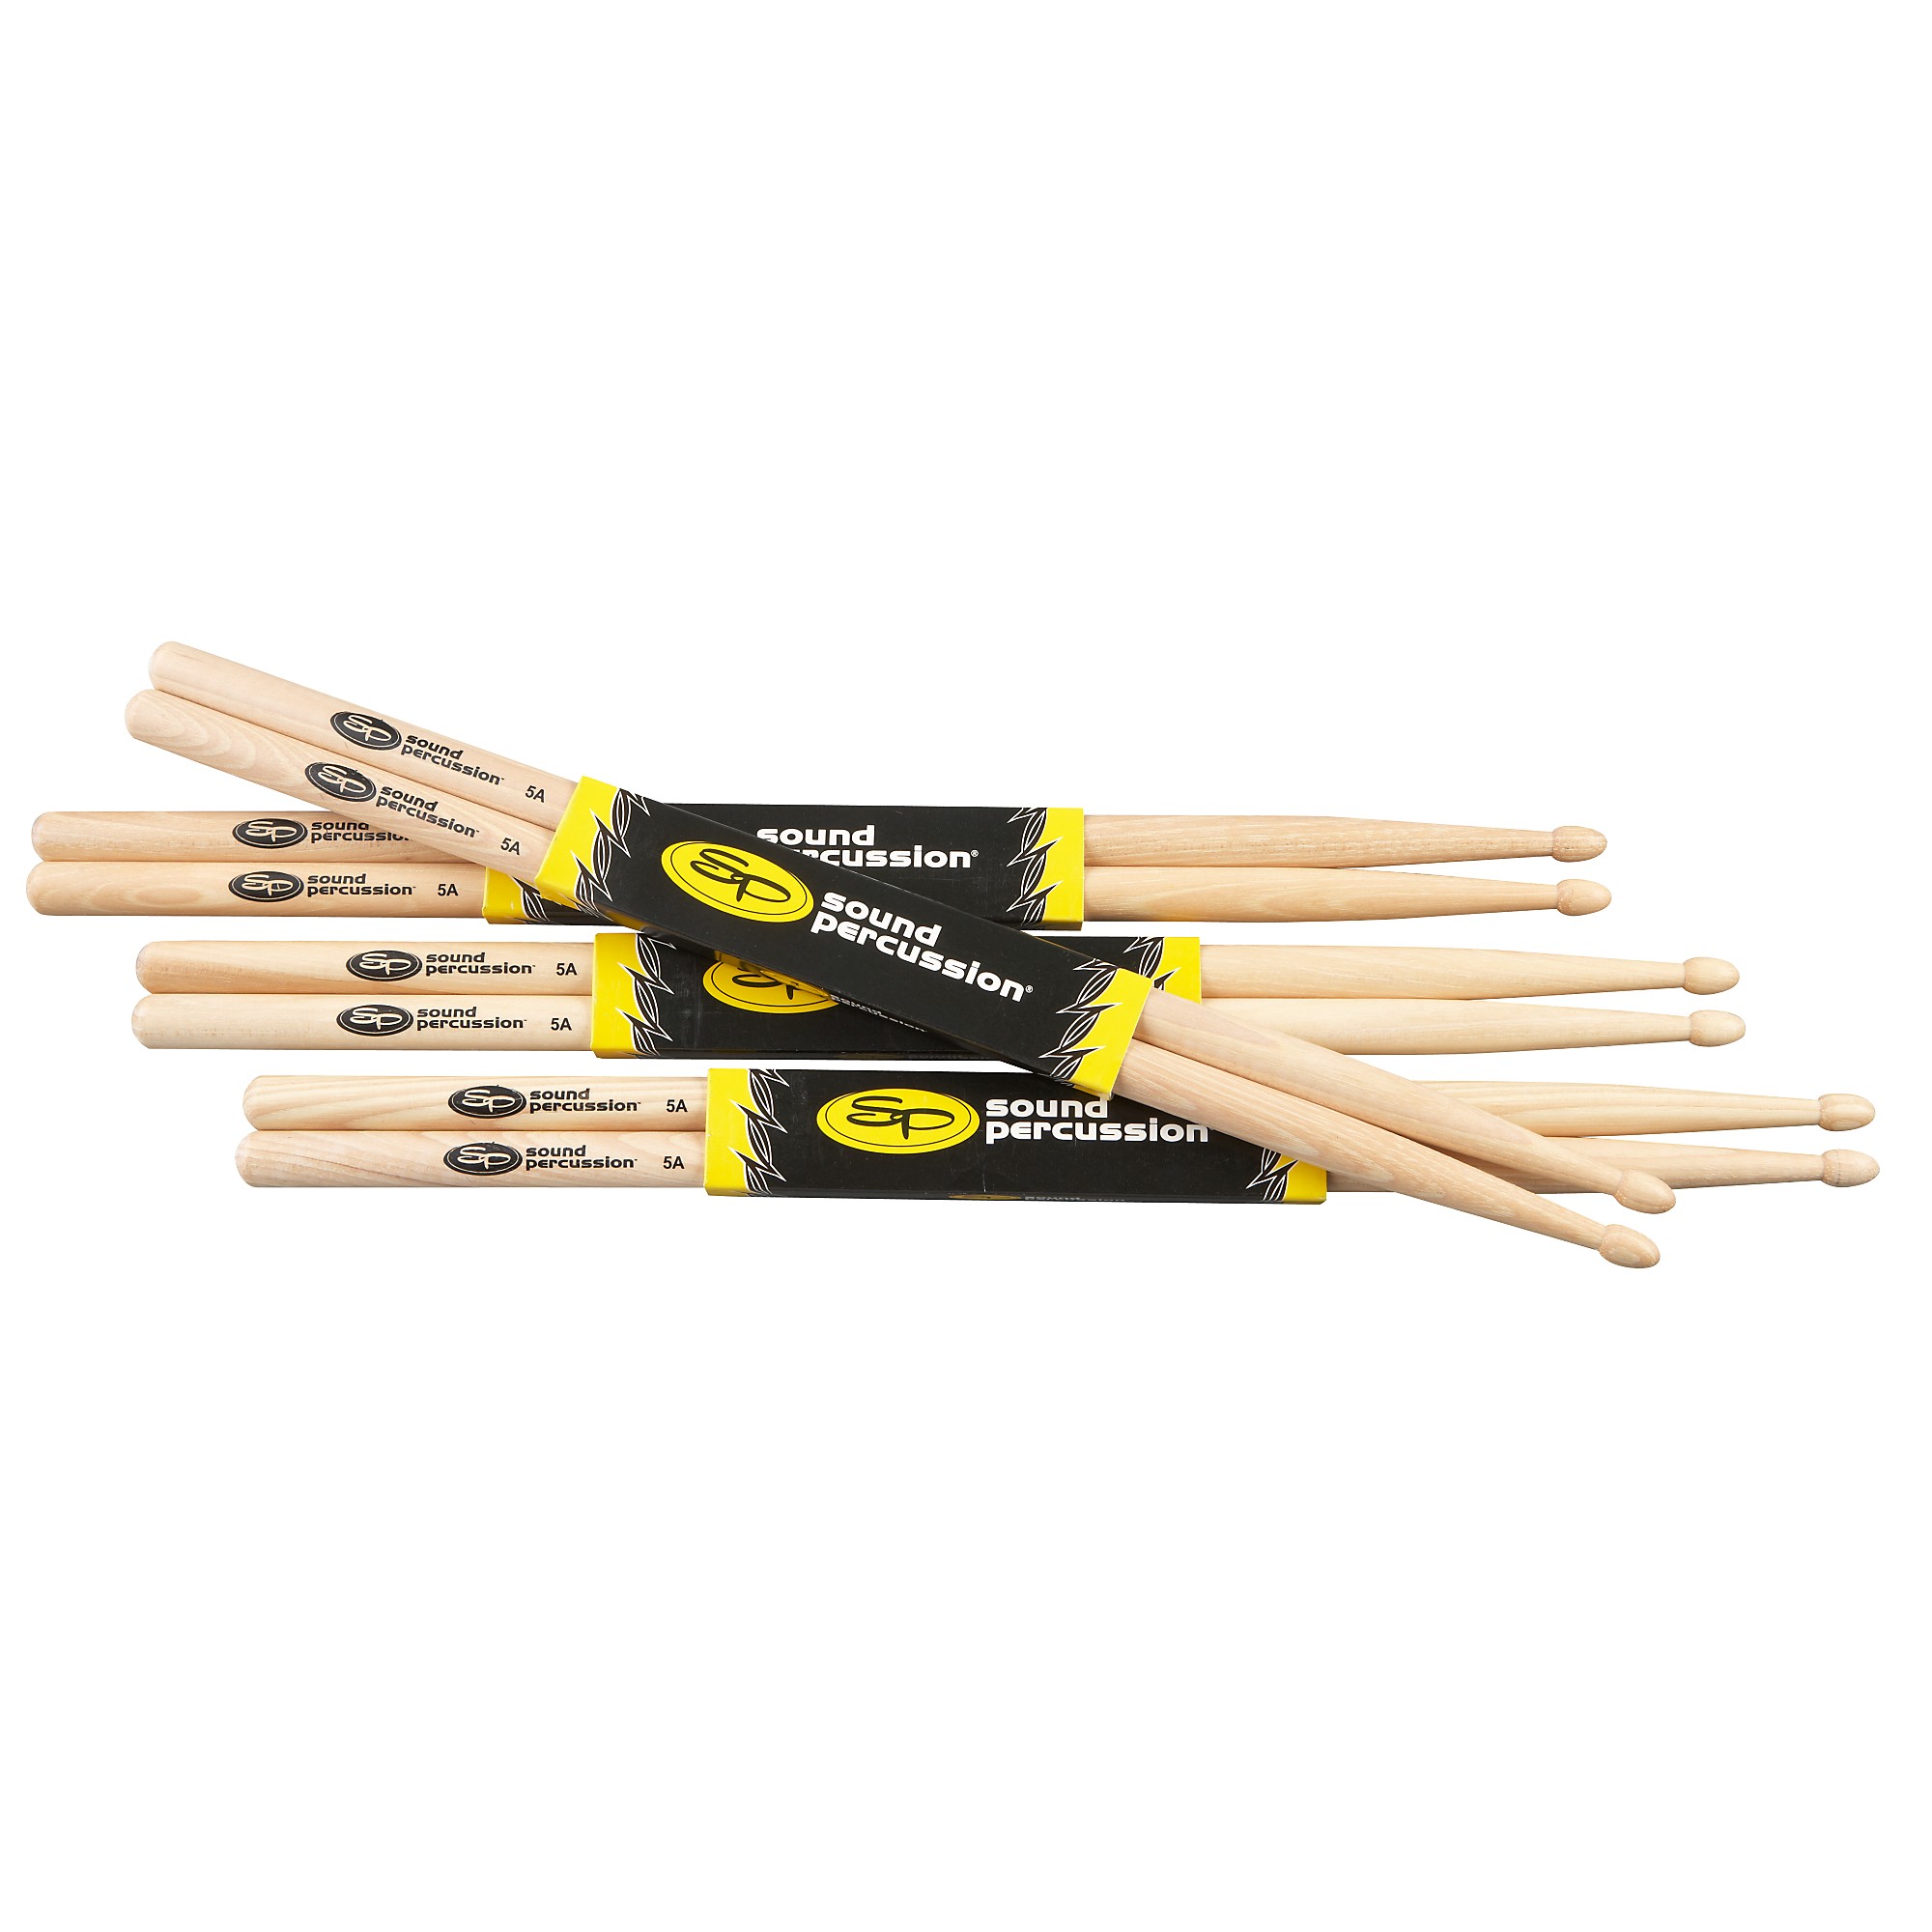 SP5AW4PK Hickory Drumsticks 5A Wood 4-Pack